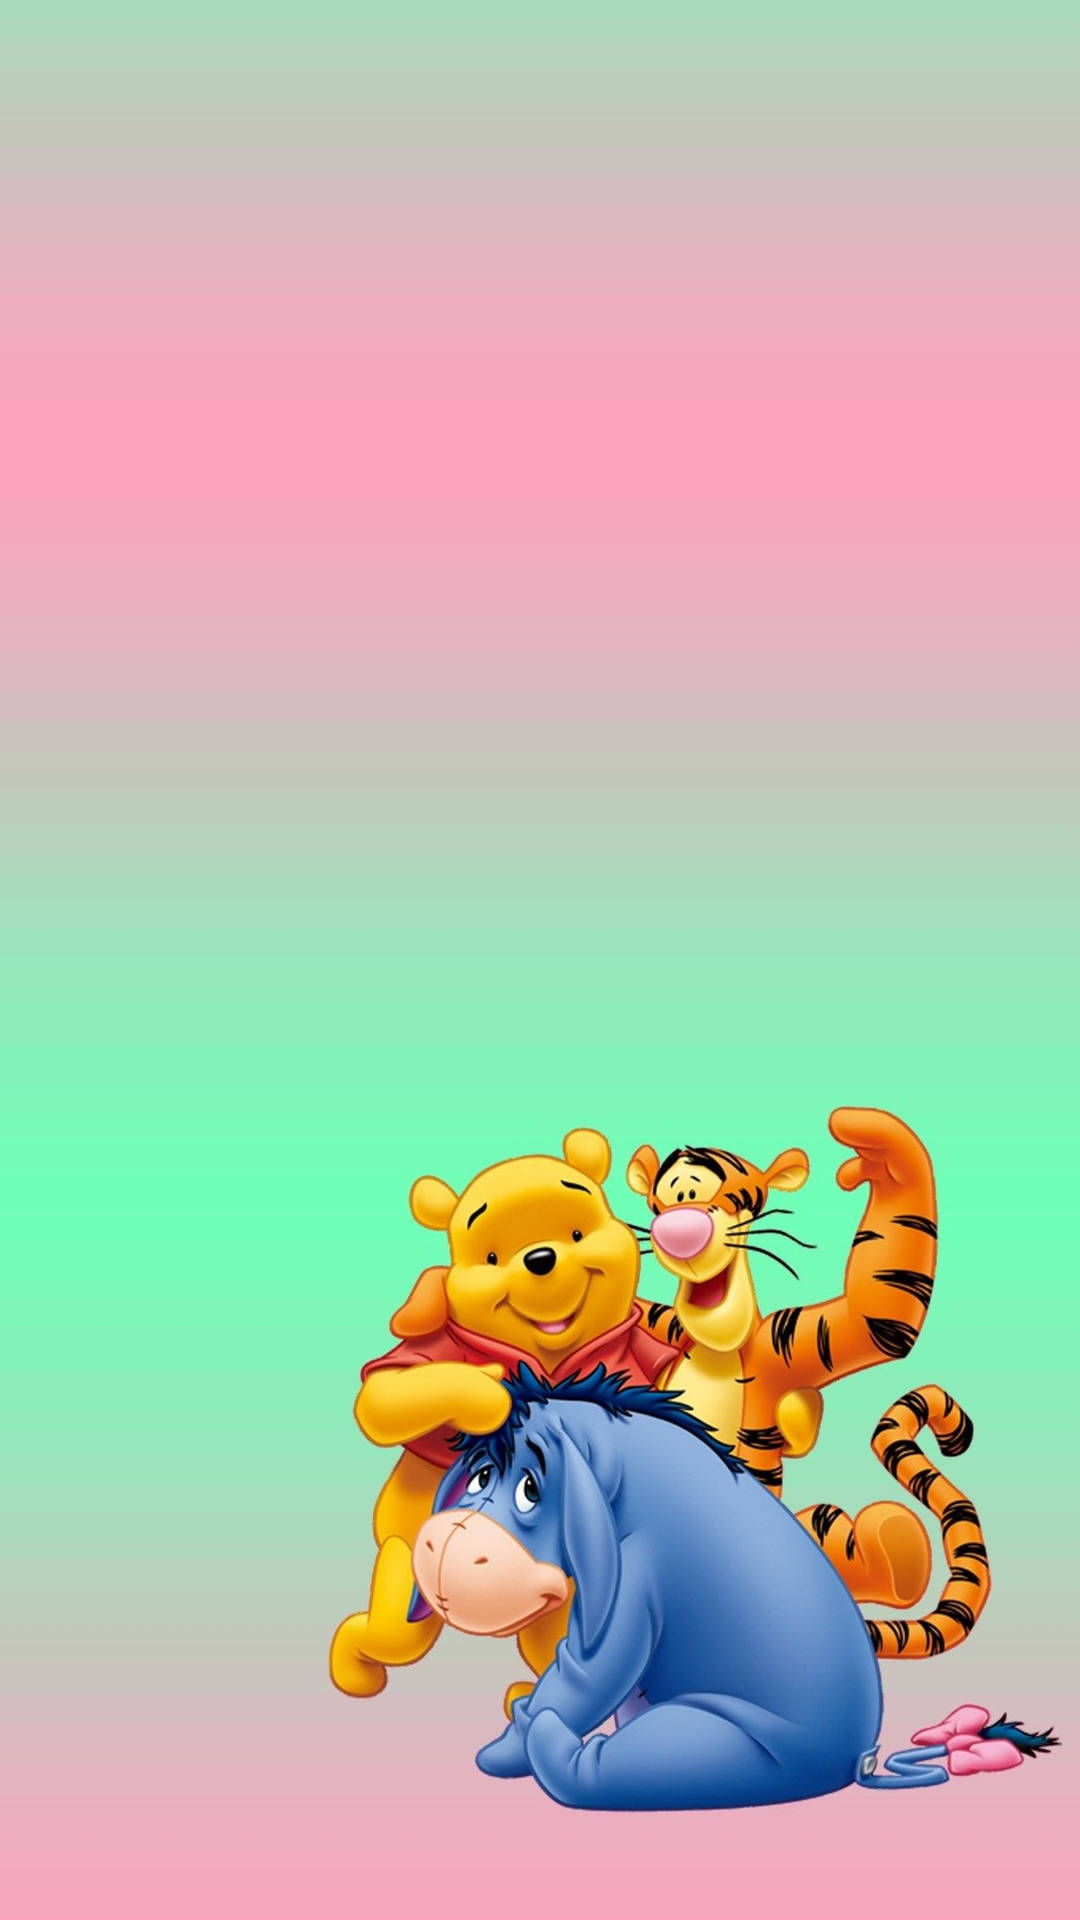 Winnie The Pooh, Tigger, and Eeyore Go on a Picnic Wallpaper